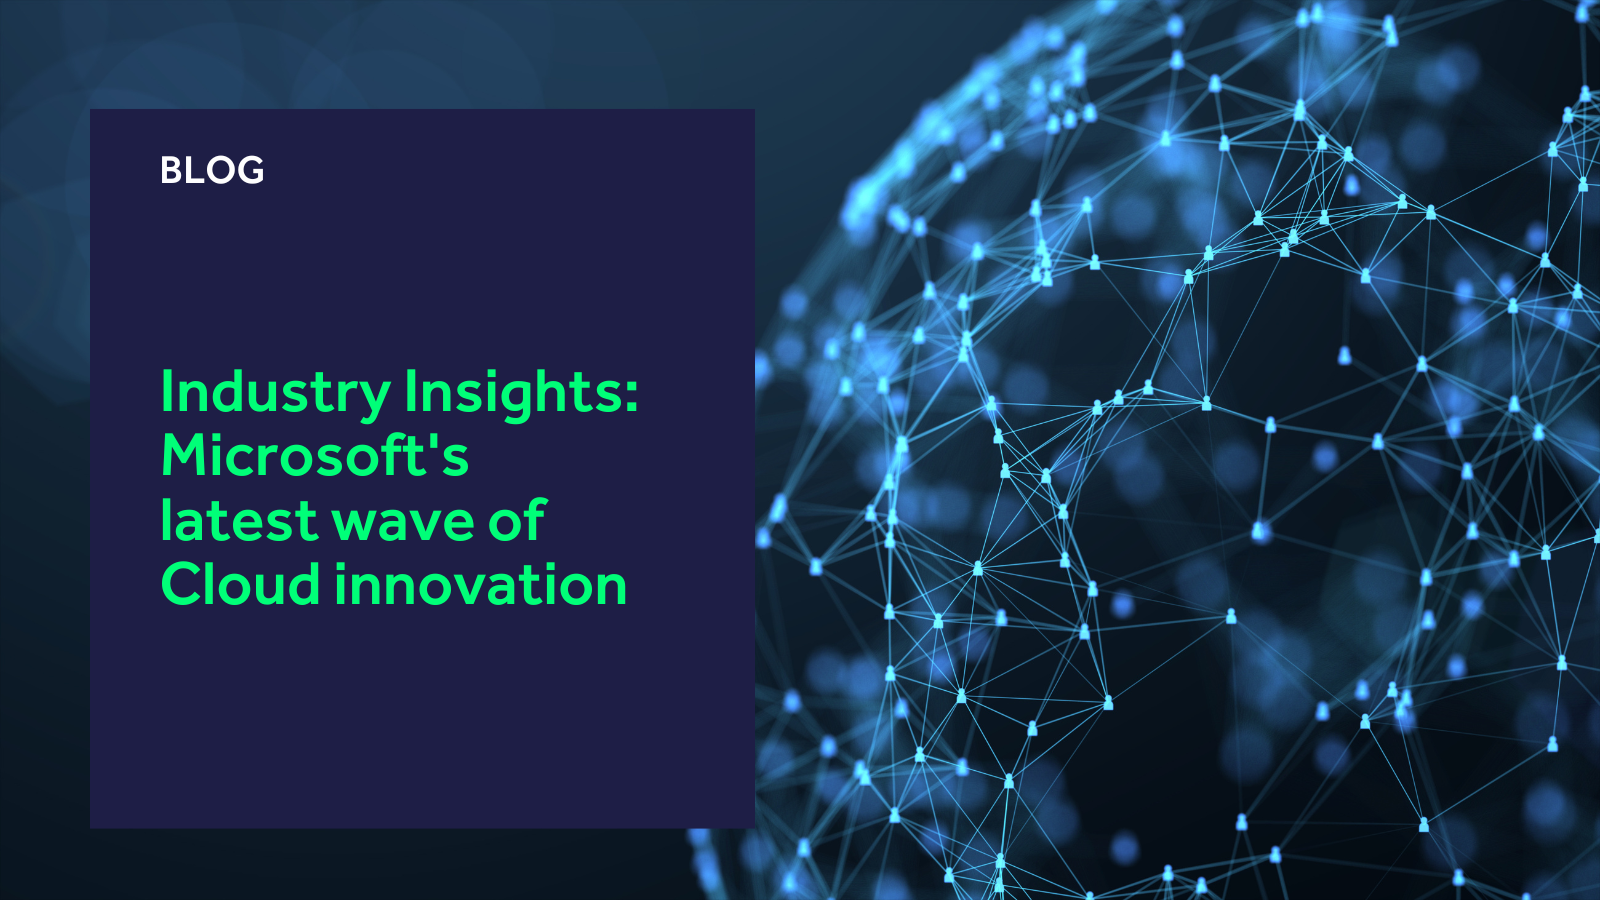 Industry Insights: Microsoft's latest wave of Cloud innovation blog header